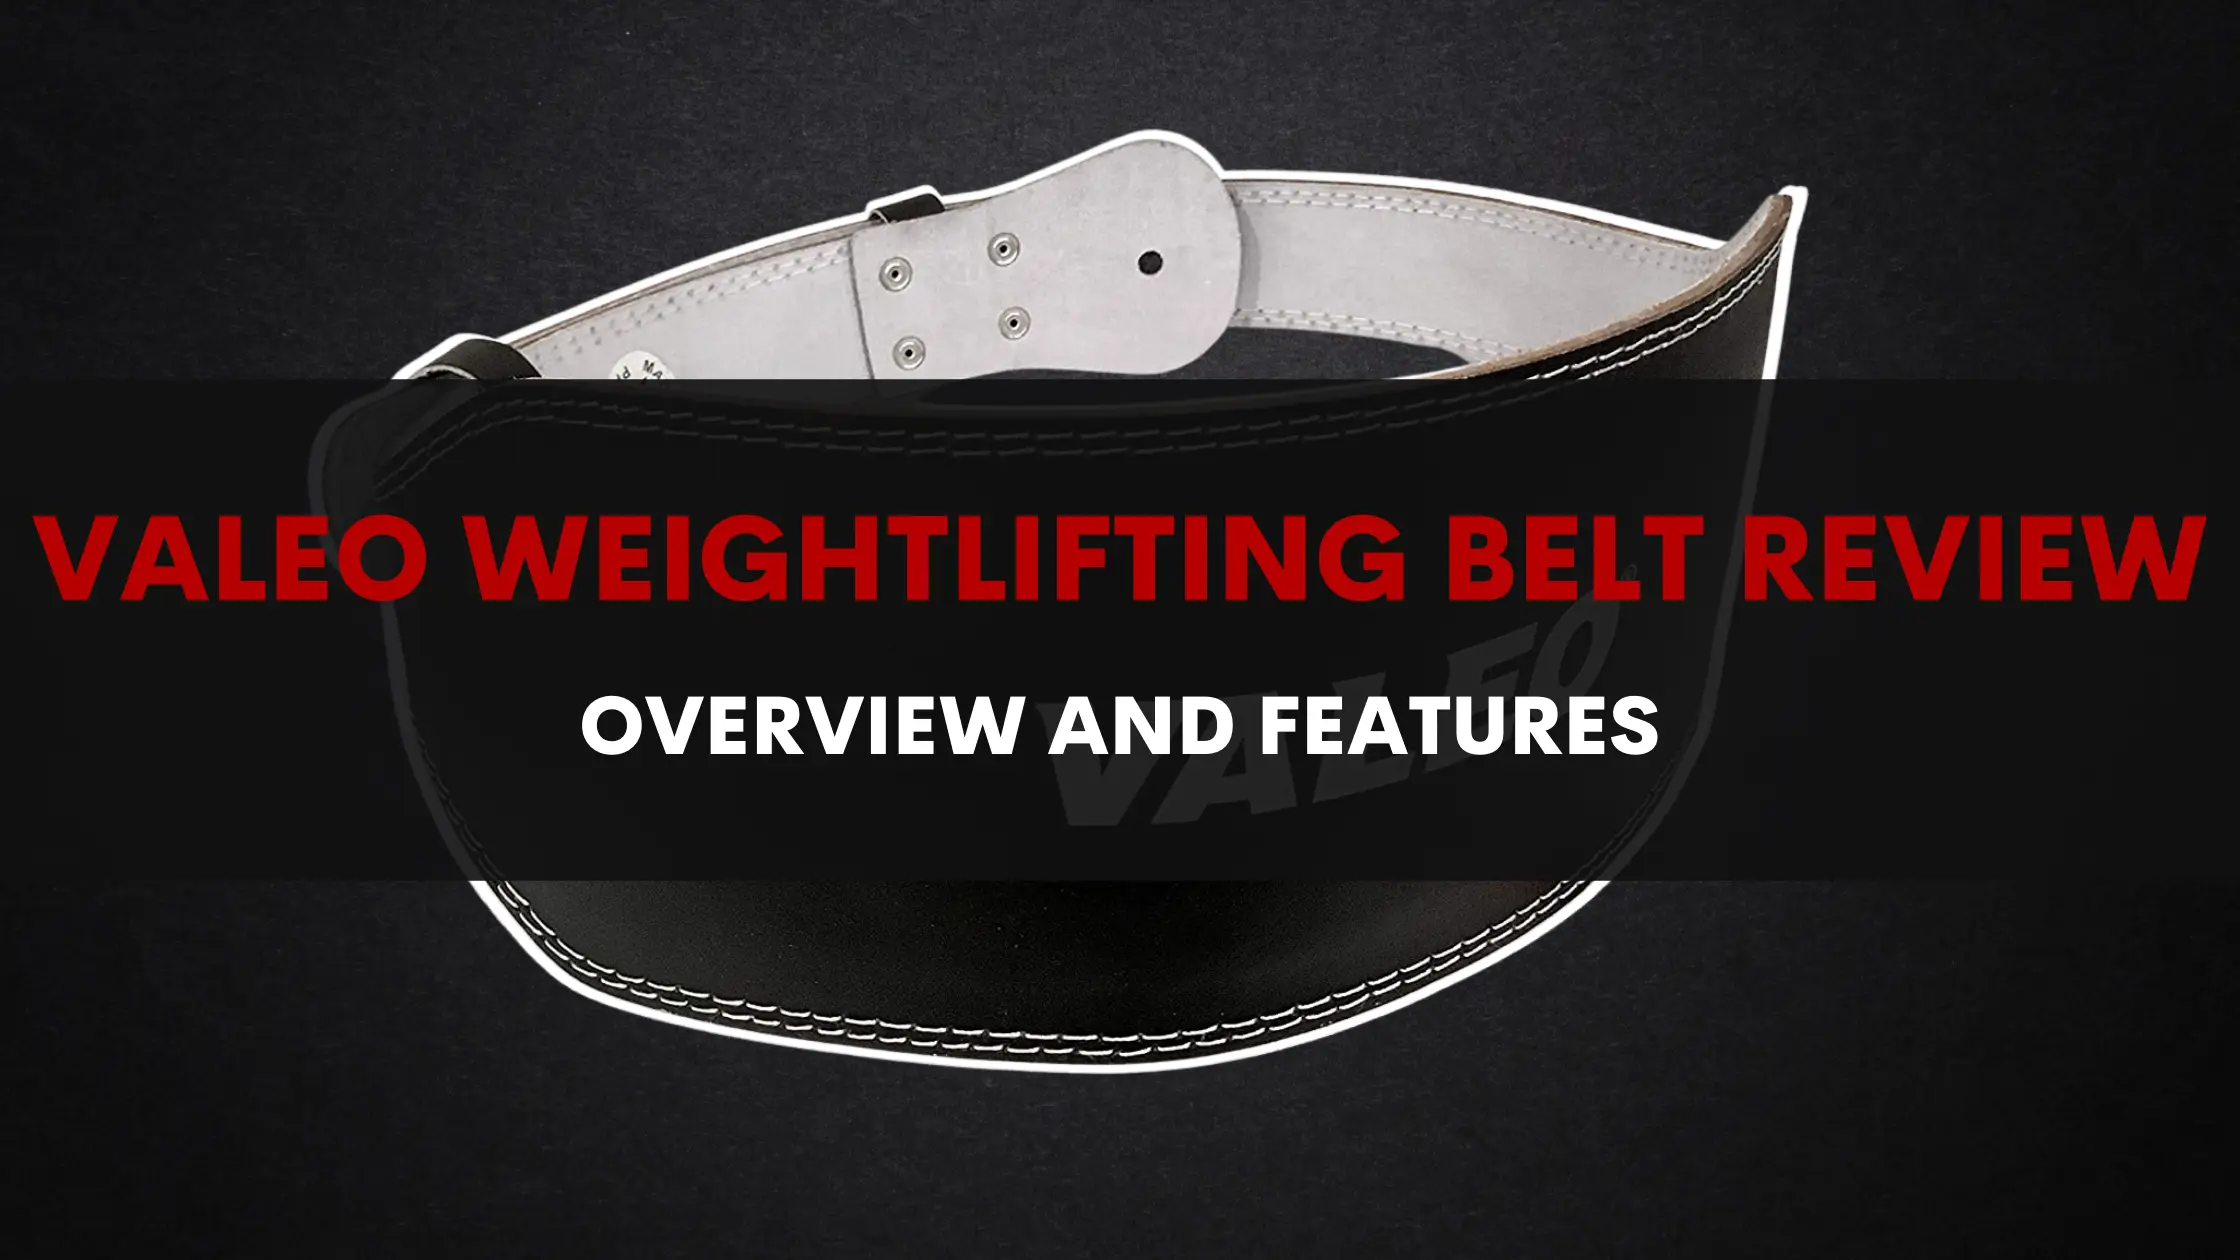 Valeo Lifting Belt Review: Overview and Features